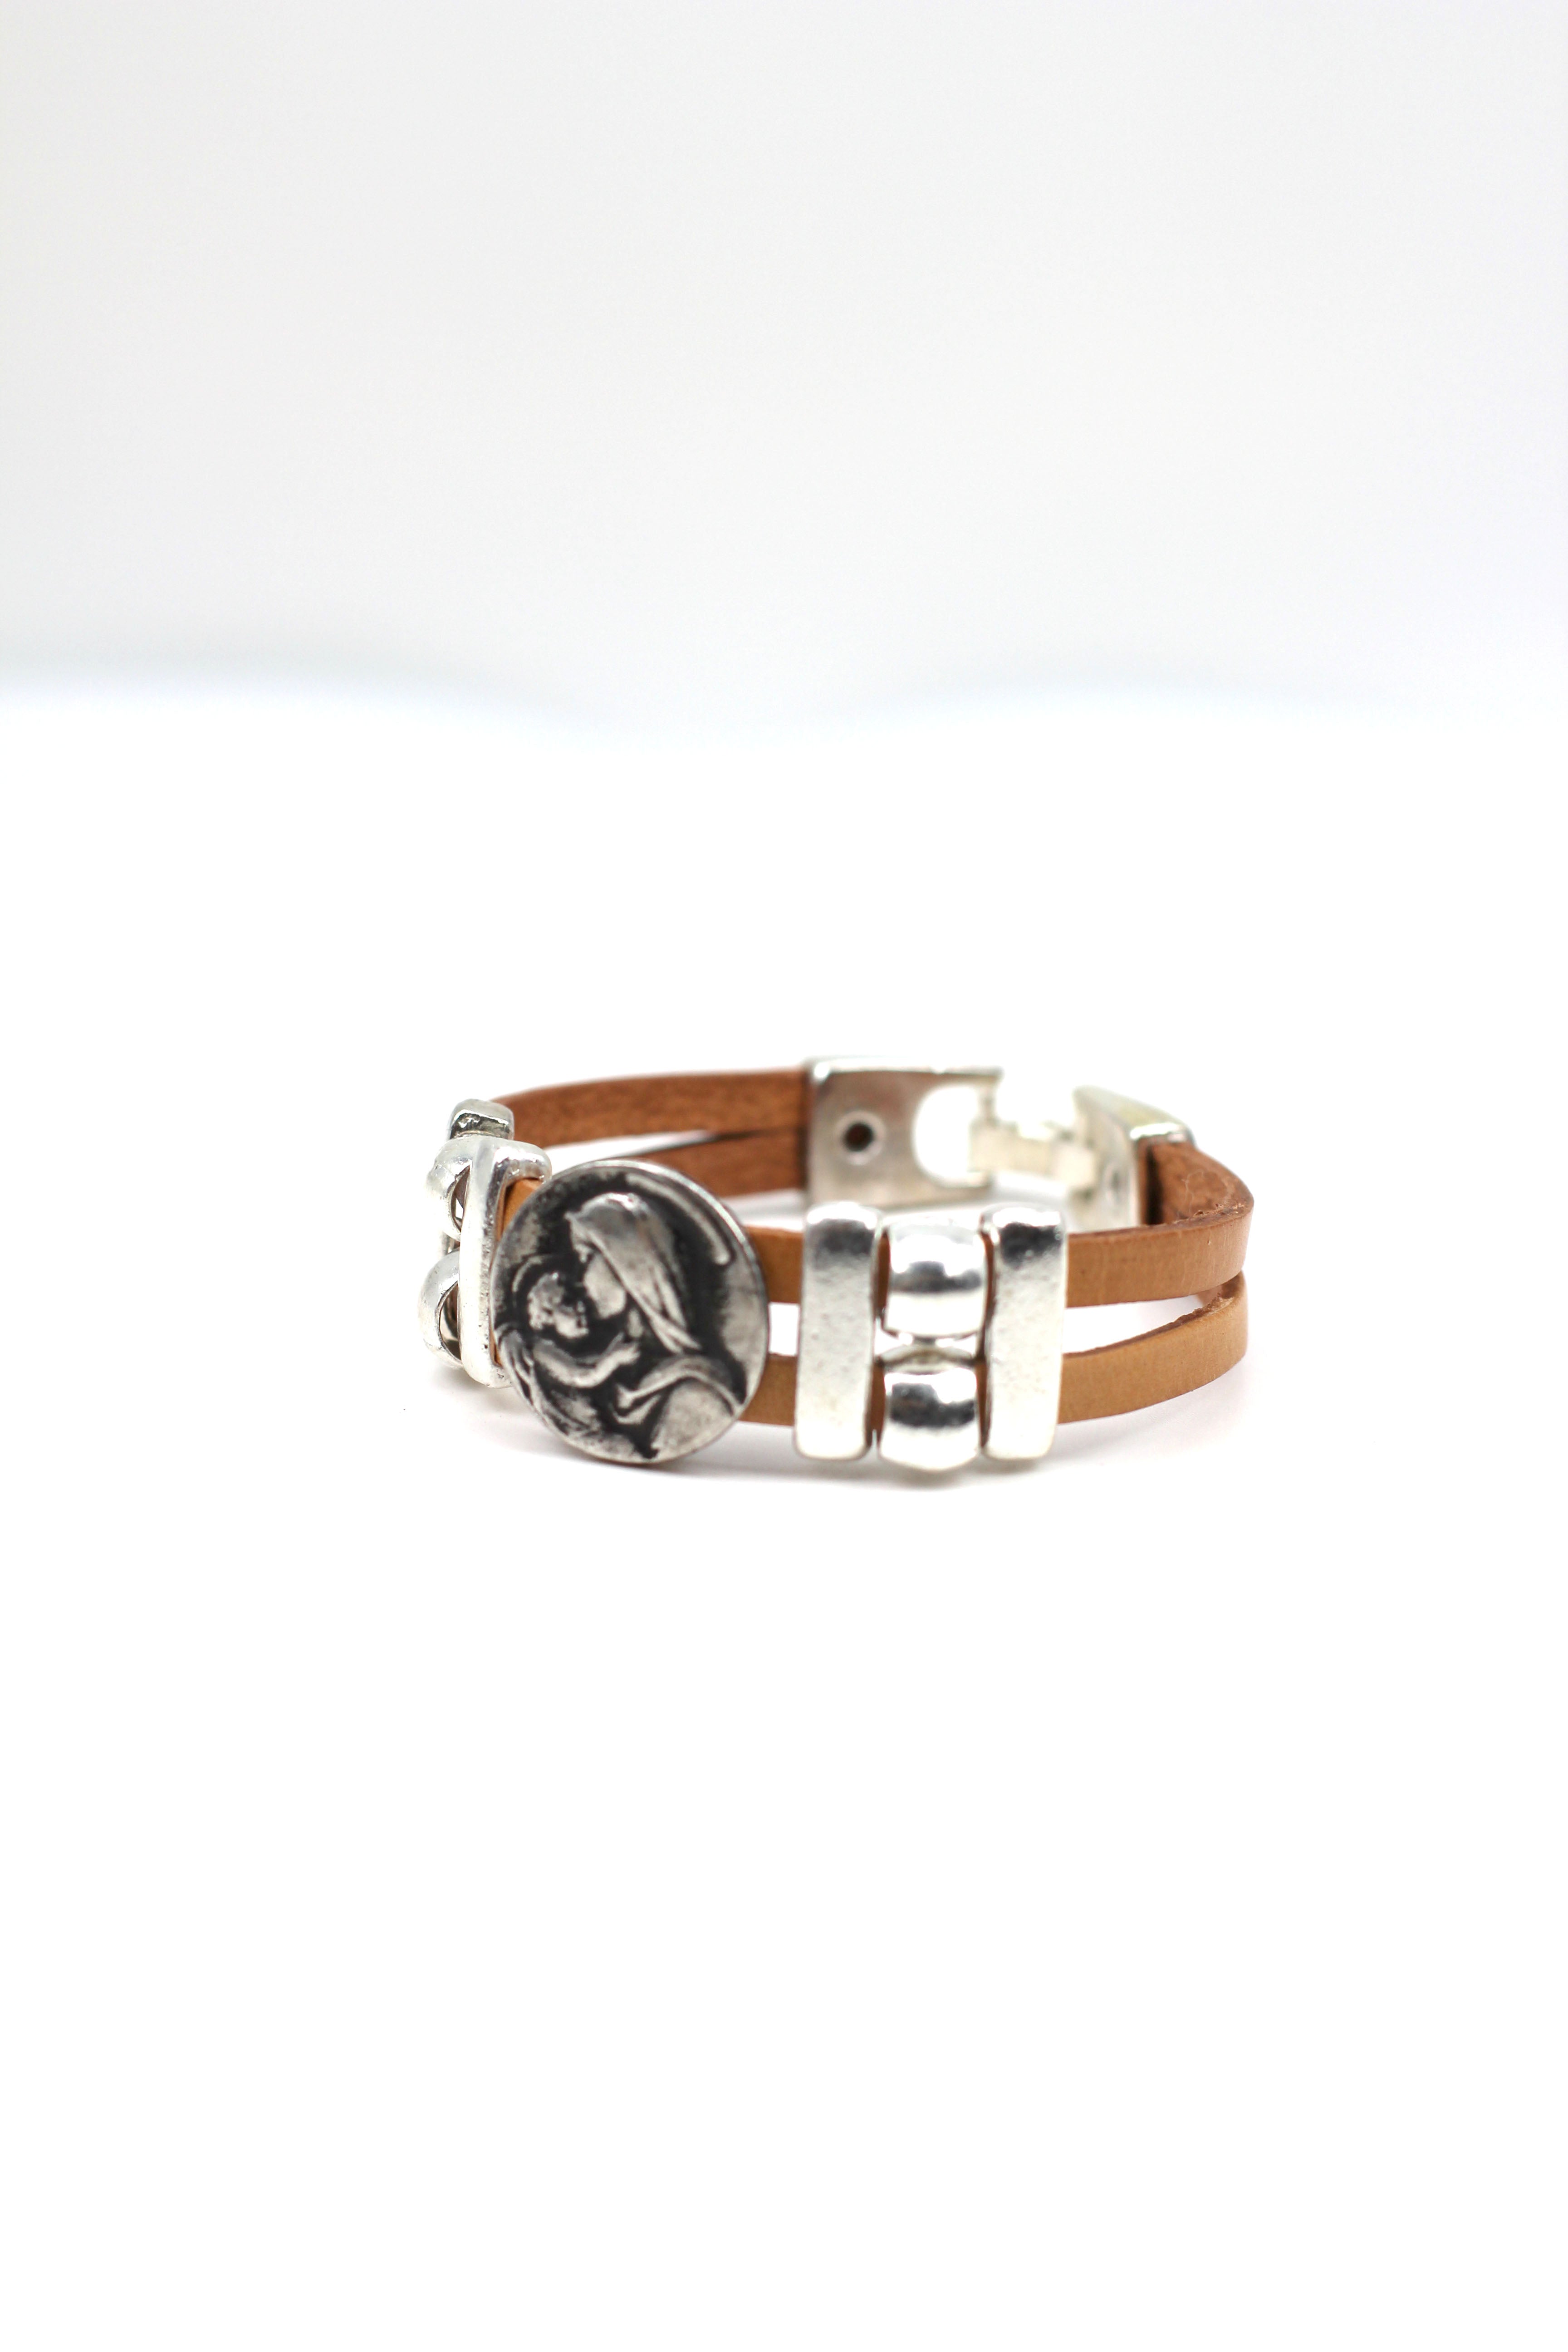 Bracelet of  The Madonna and Child Jesus bracelet handmade jewelry with Double Leather Straps by Graciela's Collection